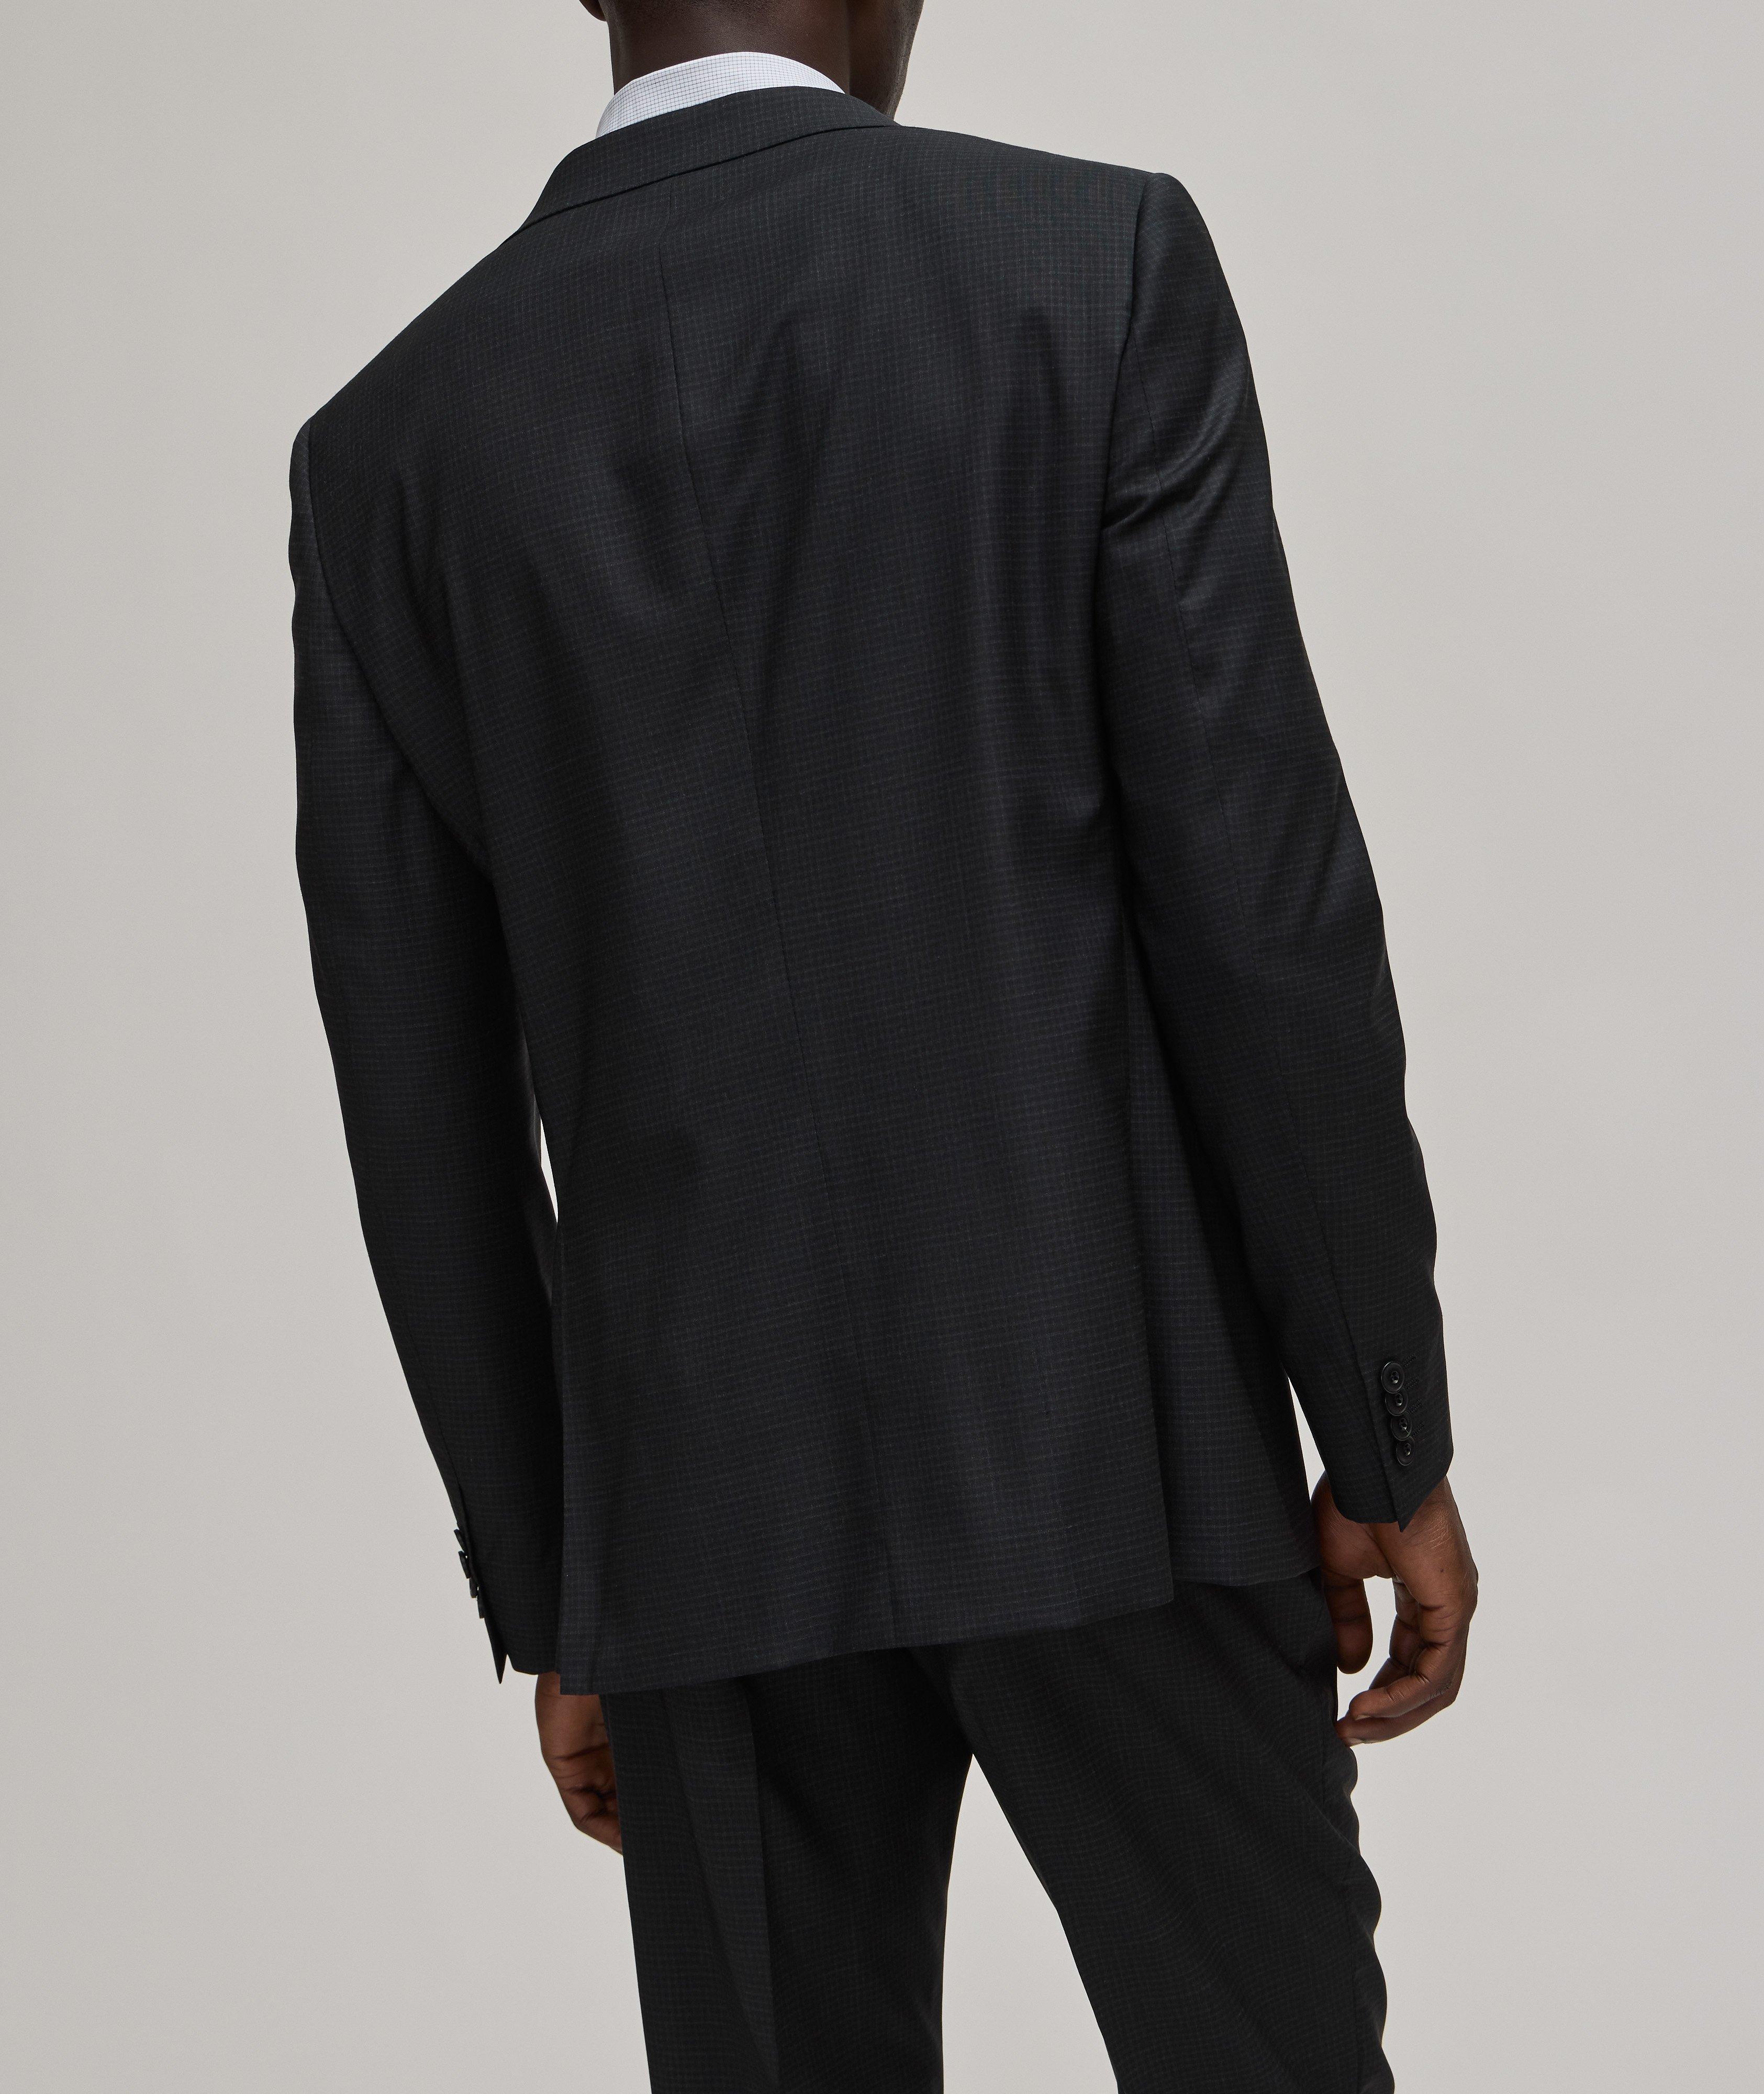 Black Edition Miniature Check Stretch-Wool Suit image 2